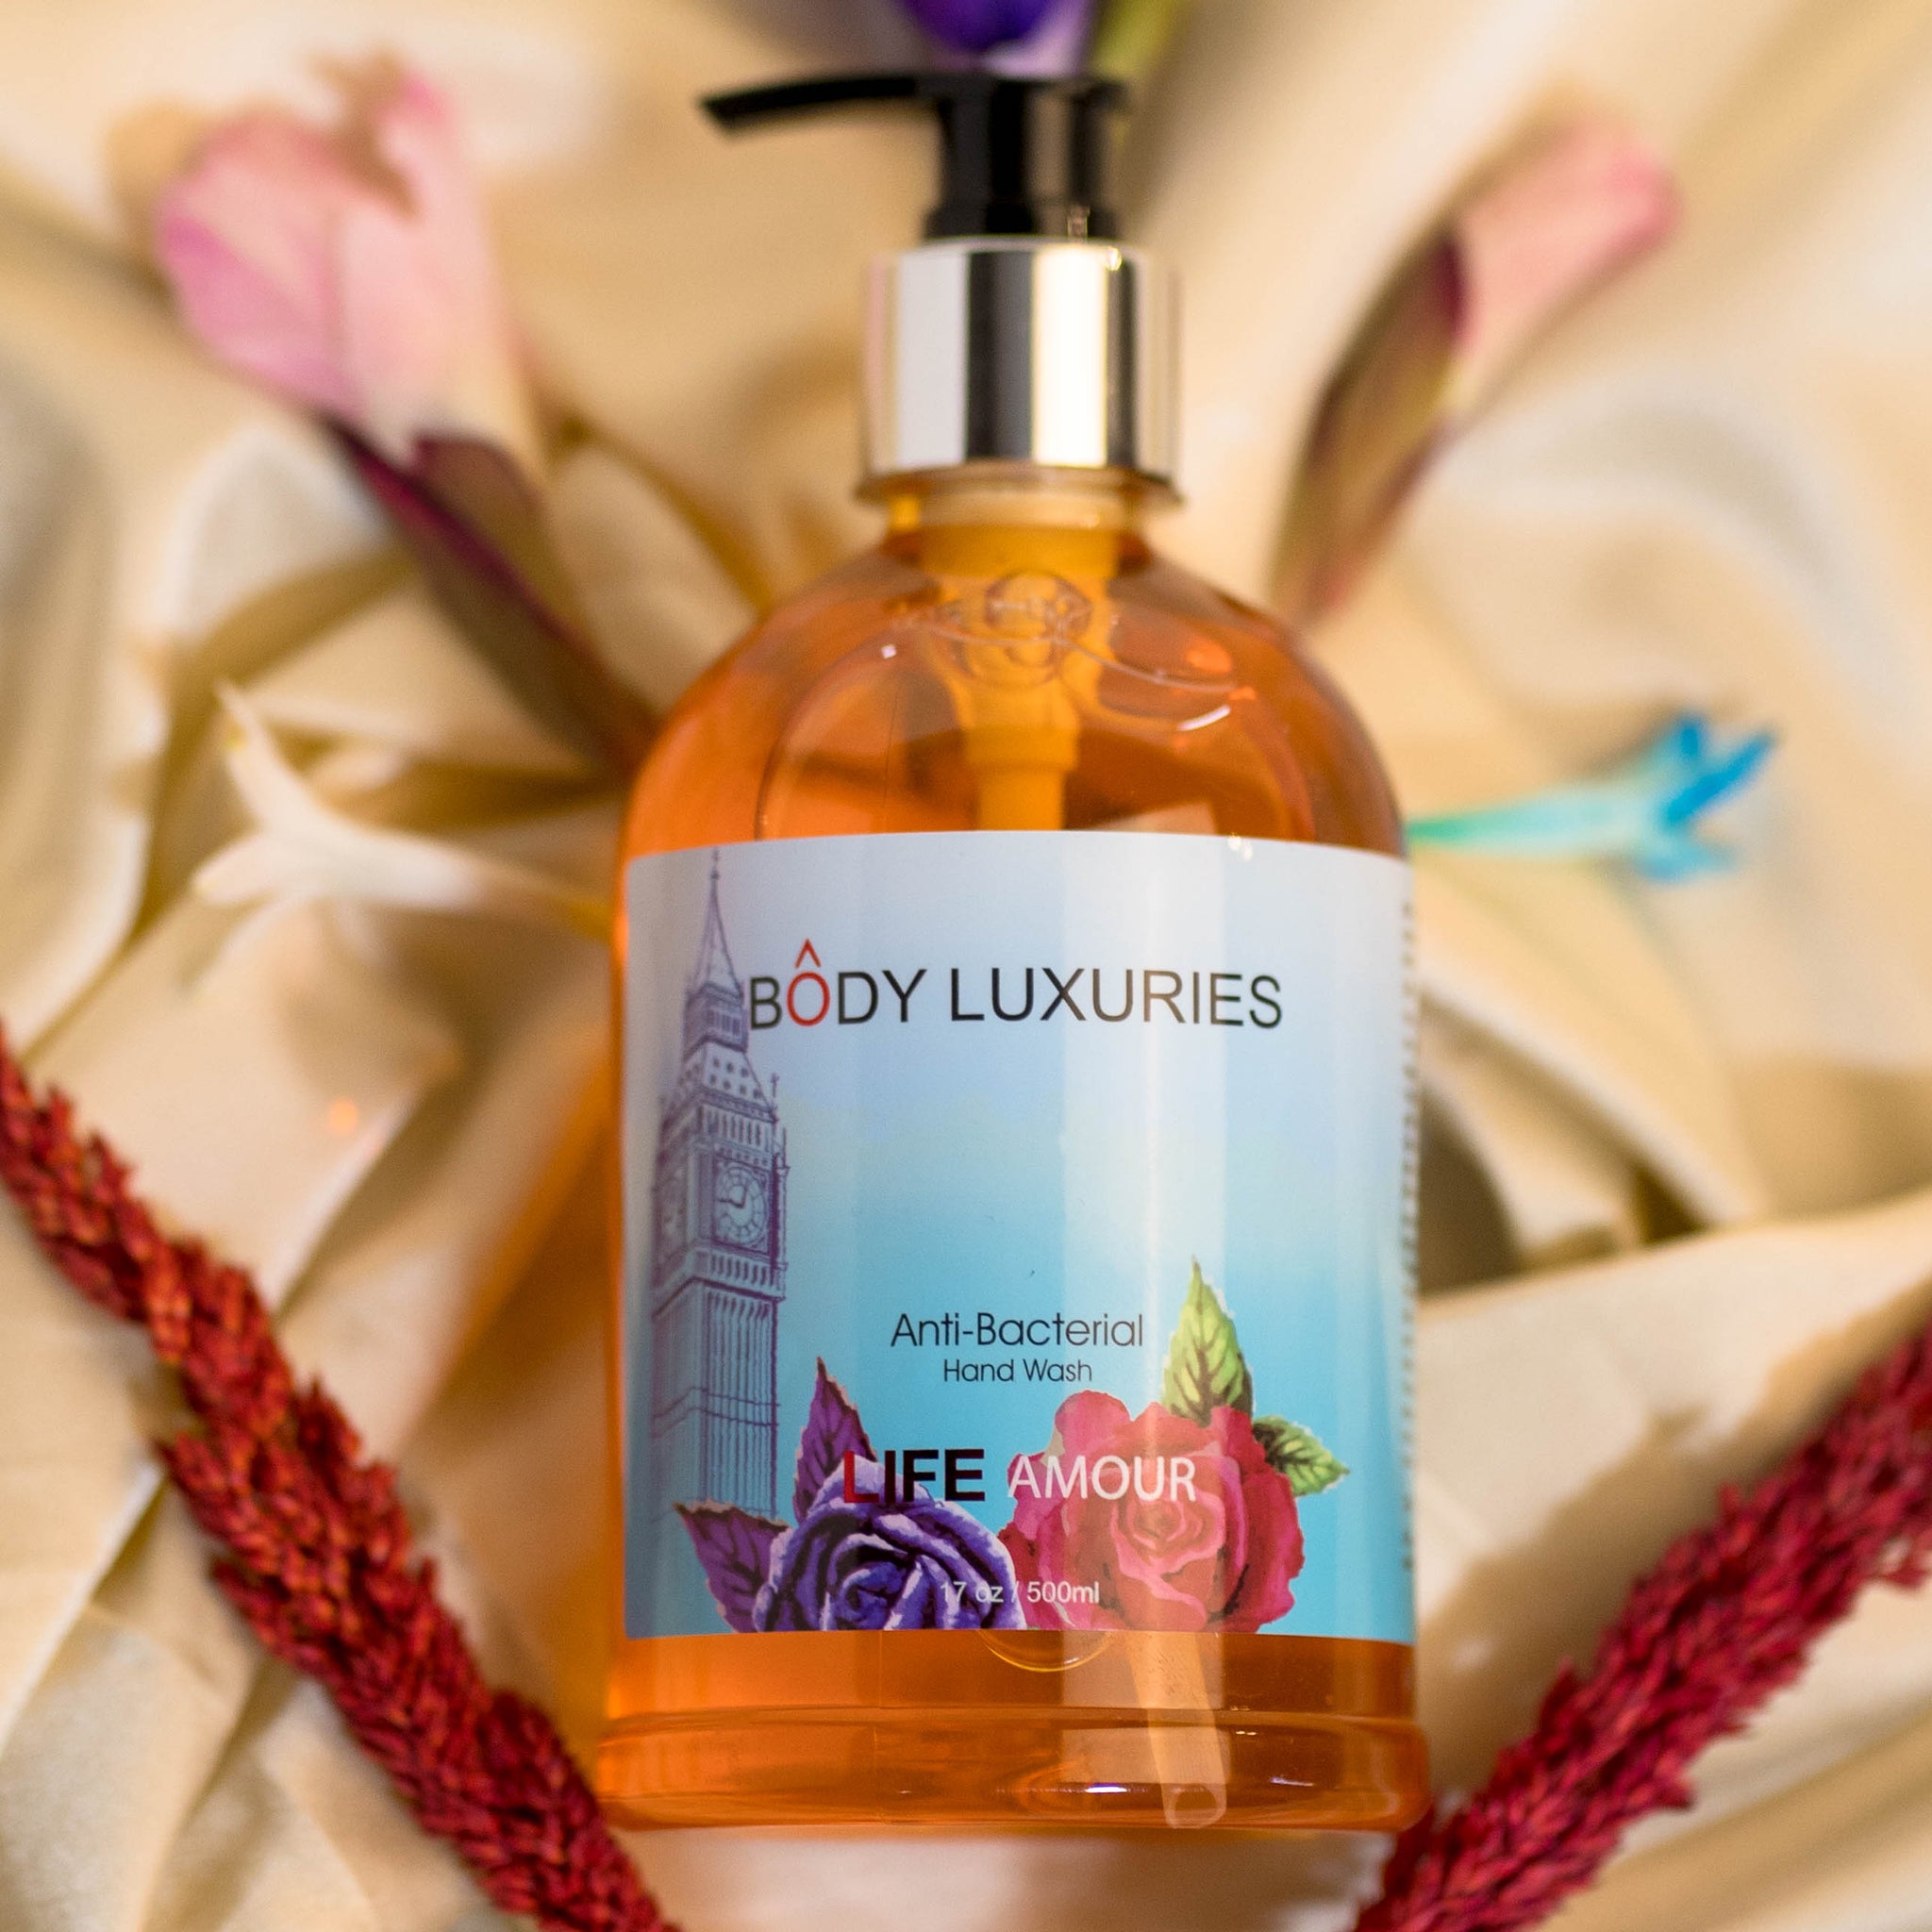 Body Luxuries Hand Wash – Life Amour 500ml